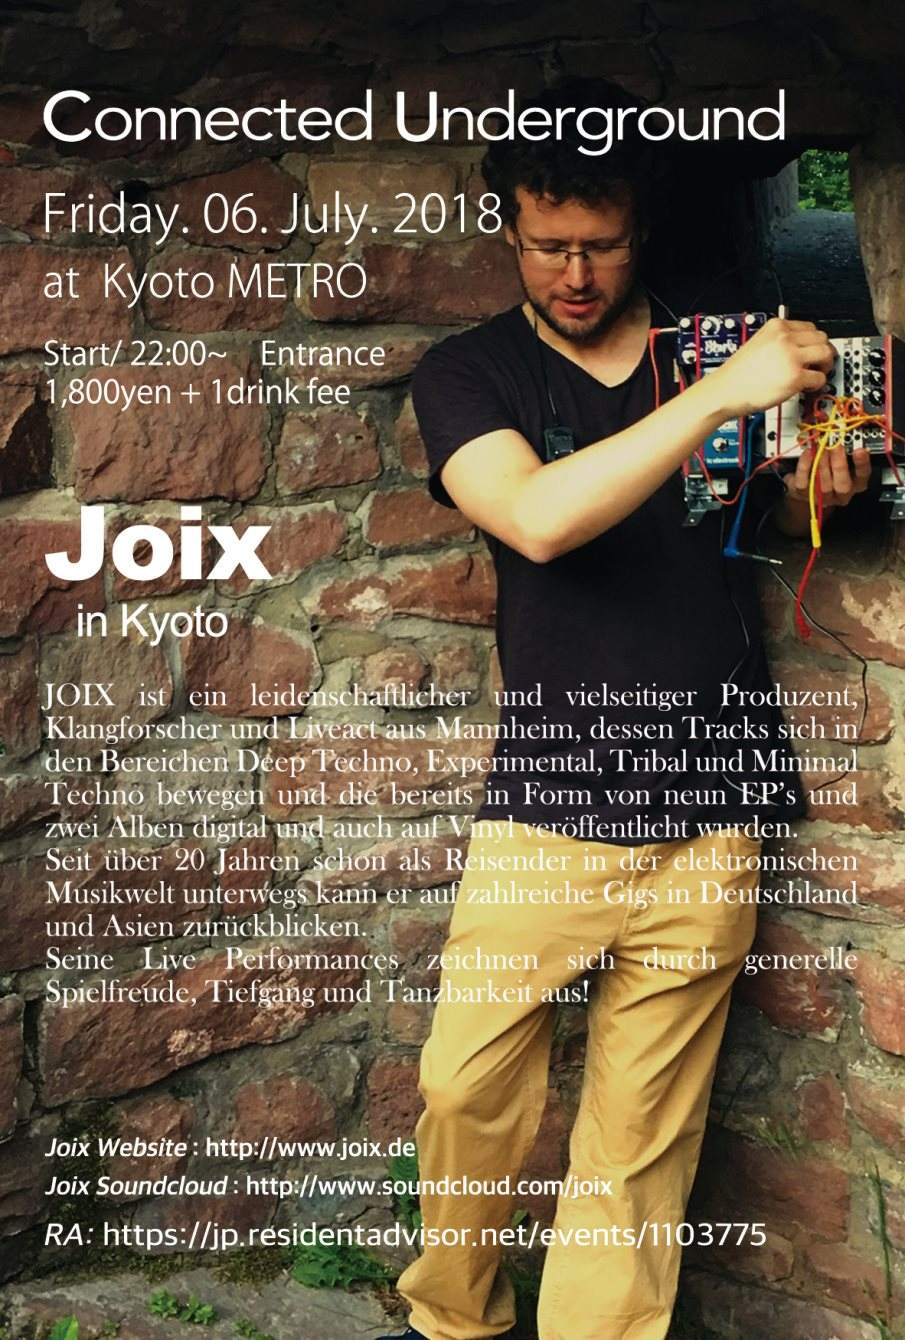 Connected Underground -Joix (Mannheim, Germany) in Kyoto- - Página frontal